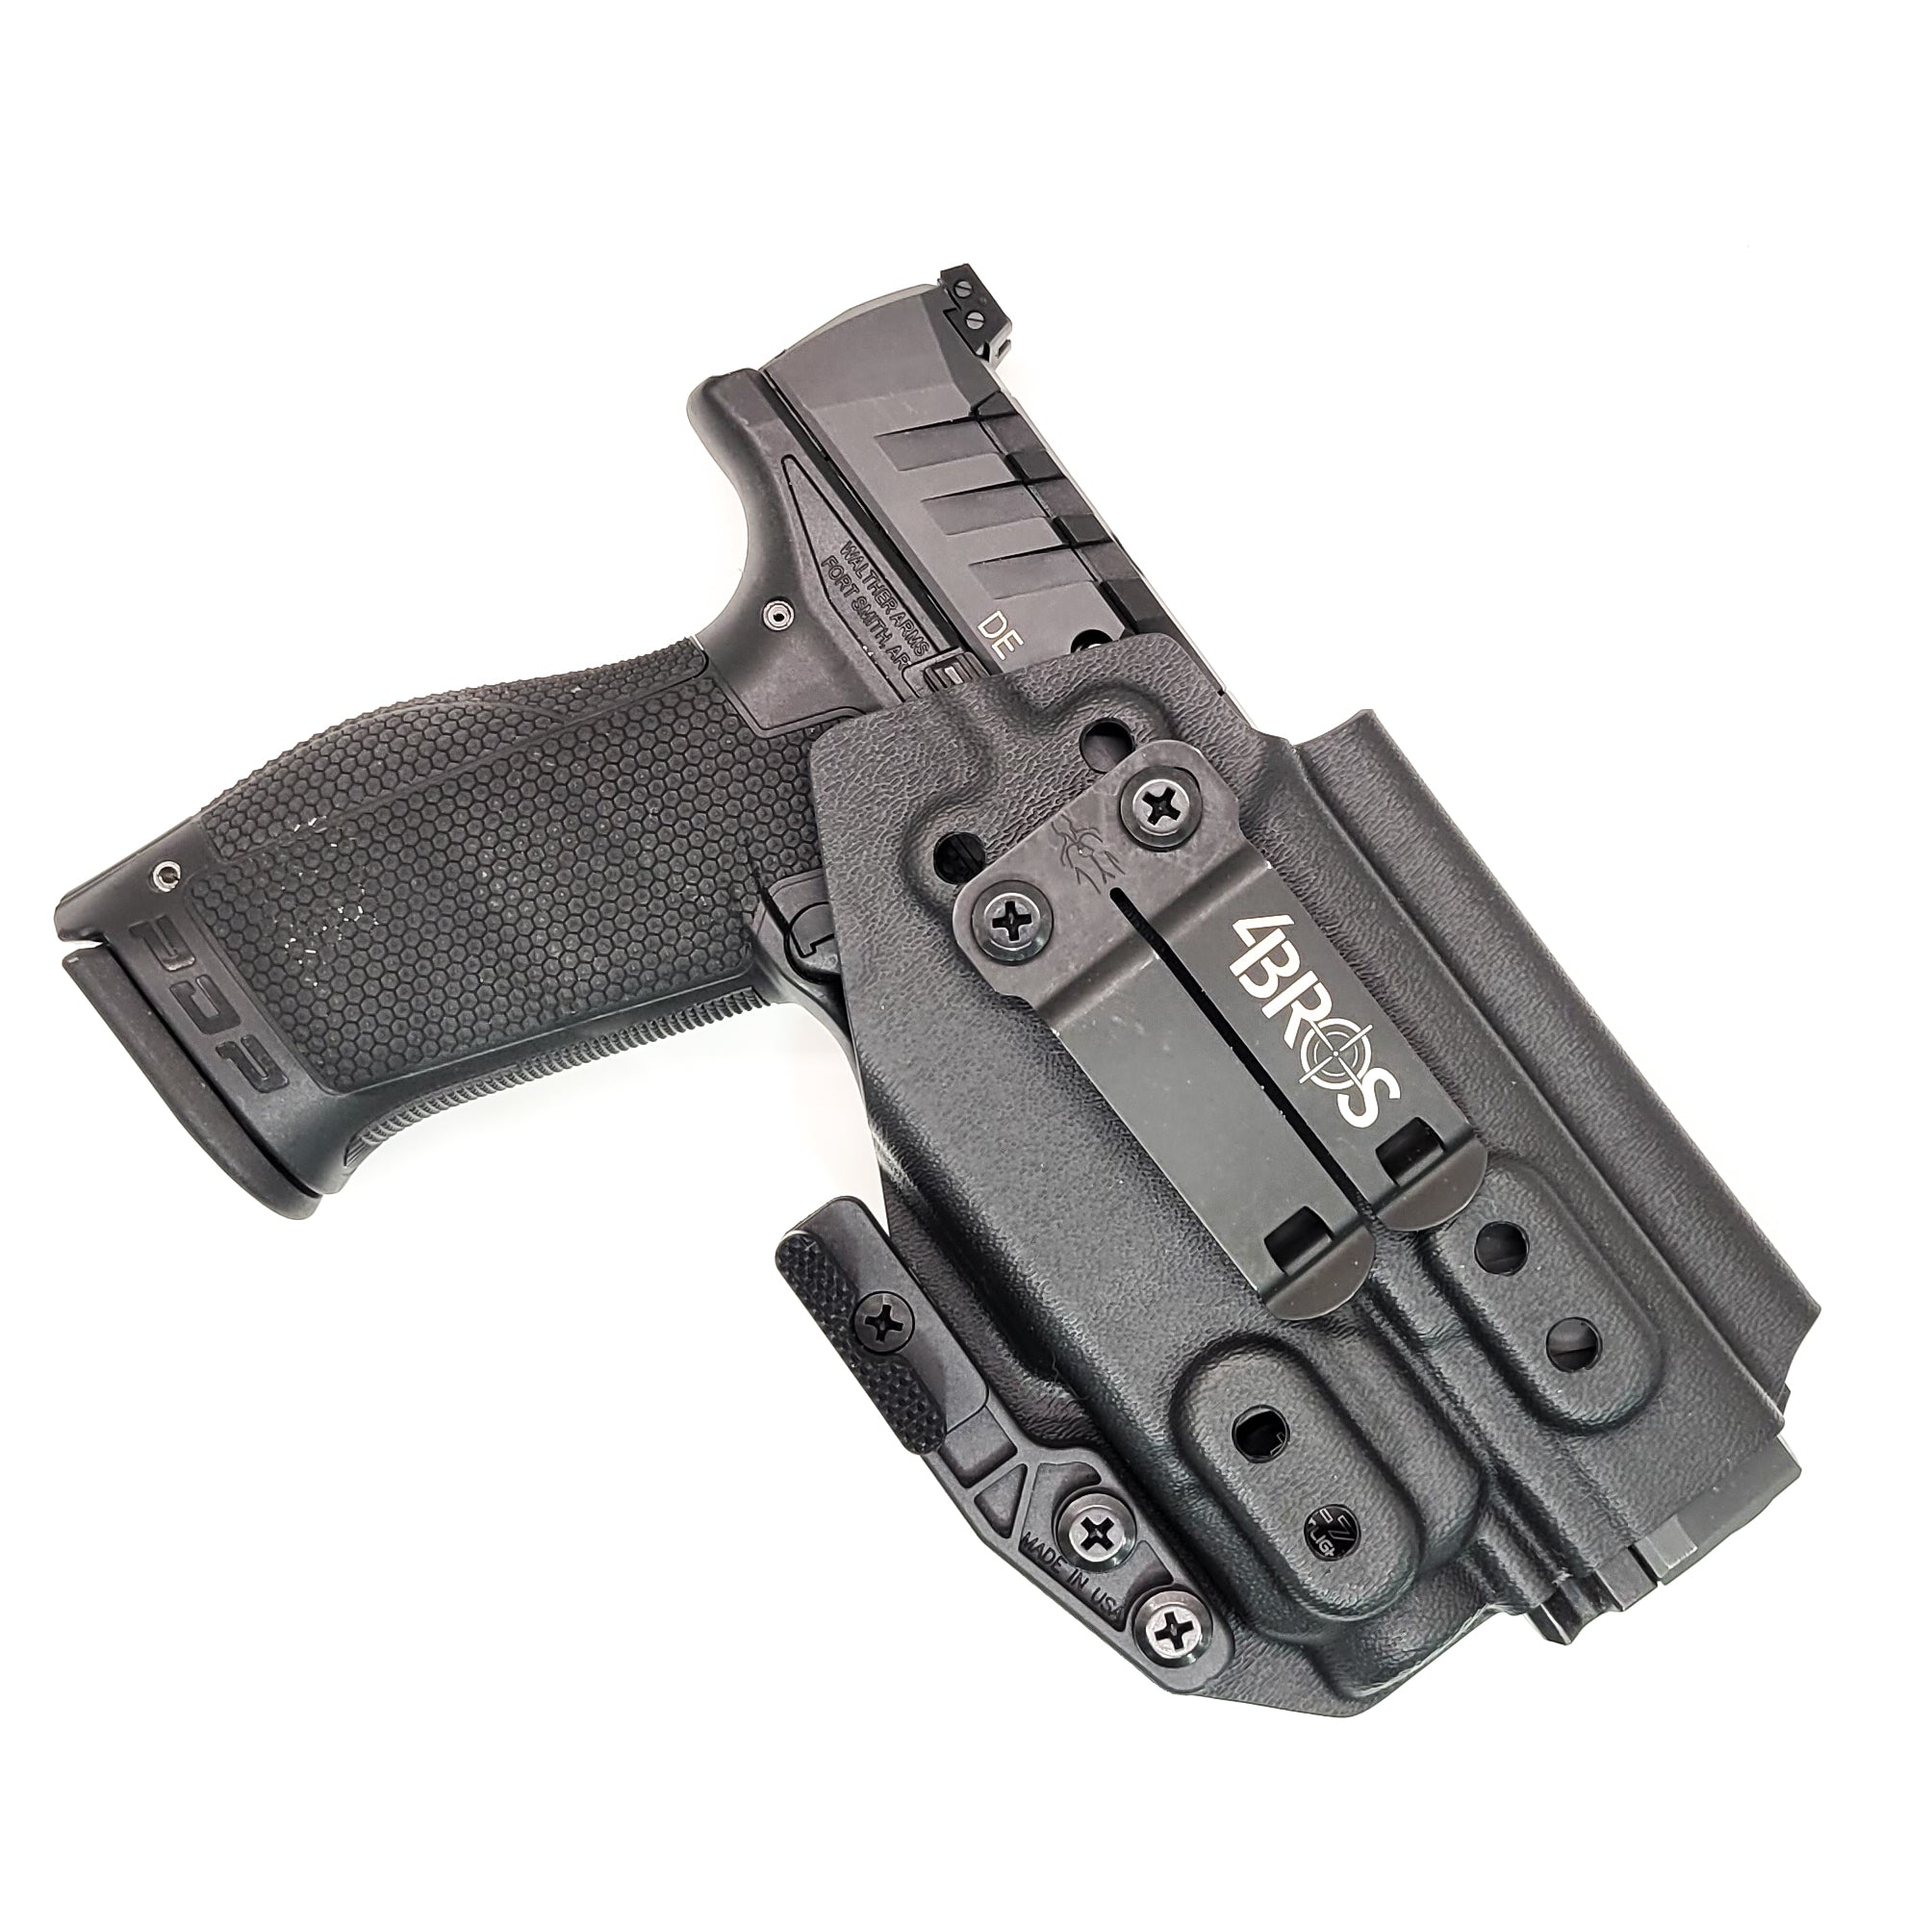 For the best concealed carry Inside Waistband IWB AIWB Holster designed to fit the Walther PDP F Series 4" & 3.5" pistols with Streamlight TLR-7A or TLR-7 on the firearm, shop Four Brothers Holsters. Cut for red dot sight, full sweat guard, adjustable retention & open muzzle for threaded barrels & compensators. PDPF TLR7